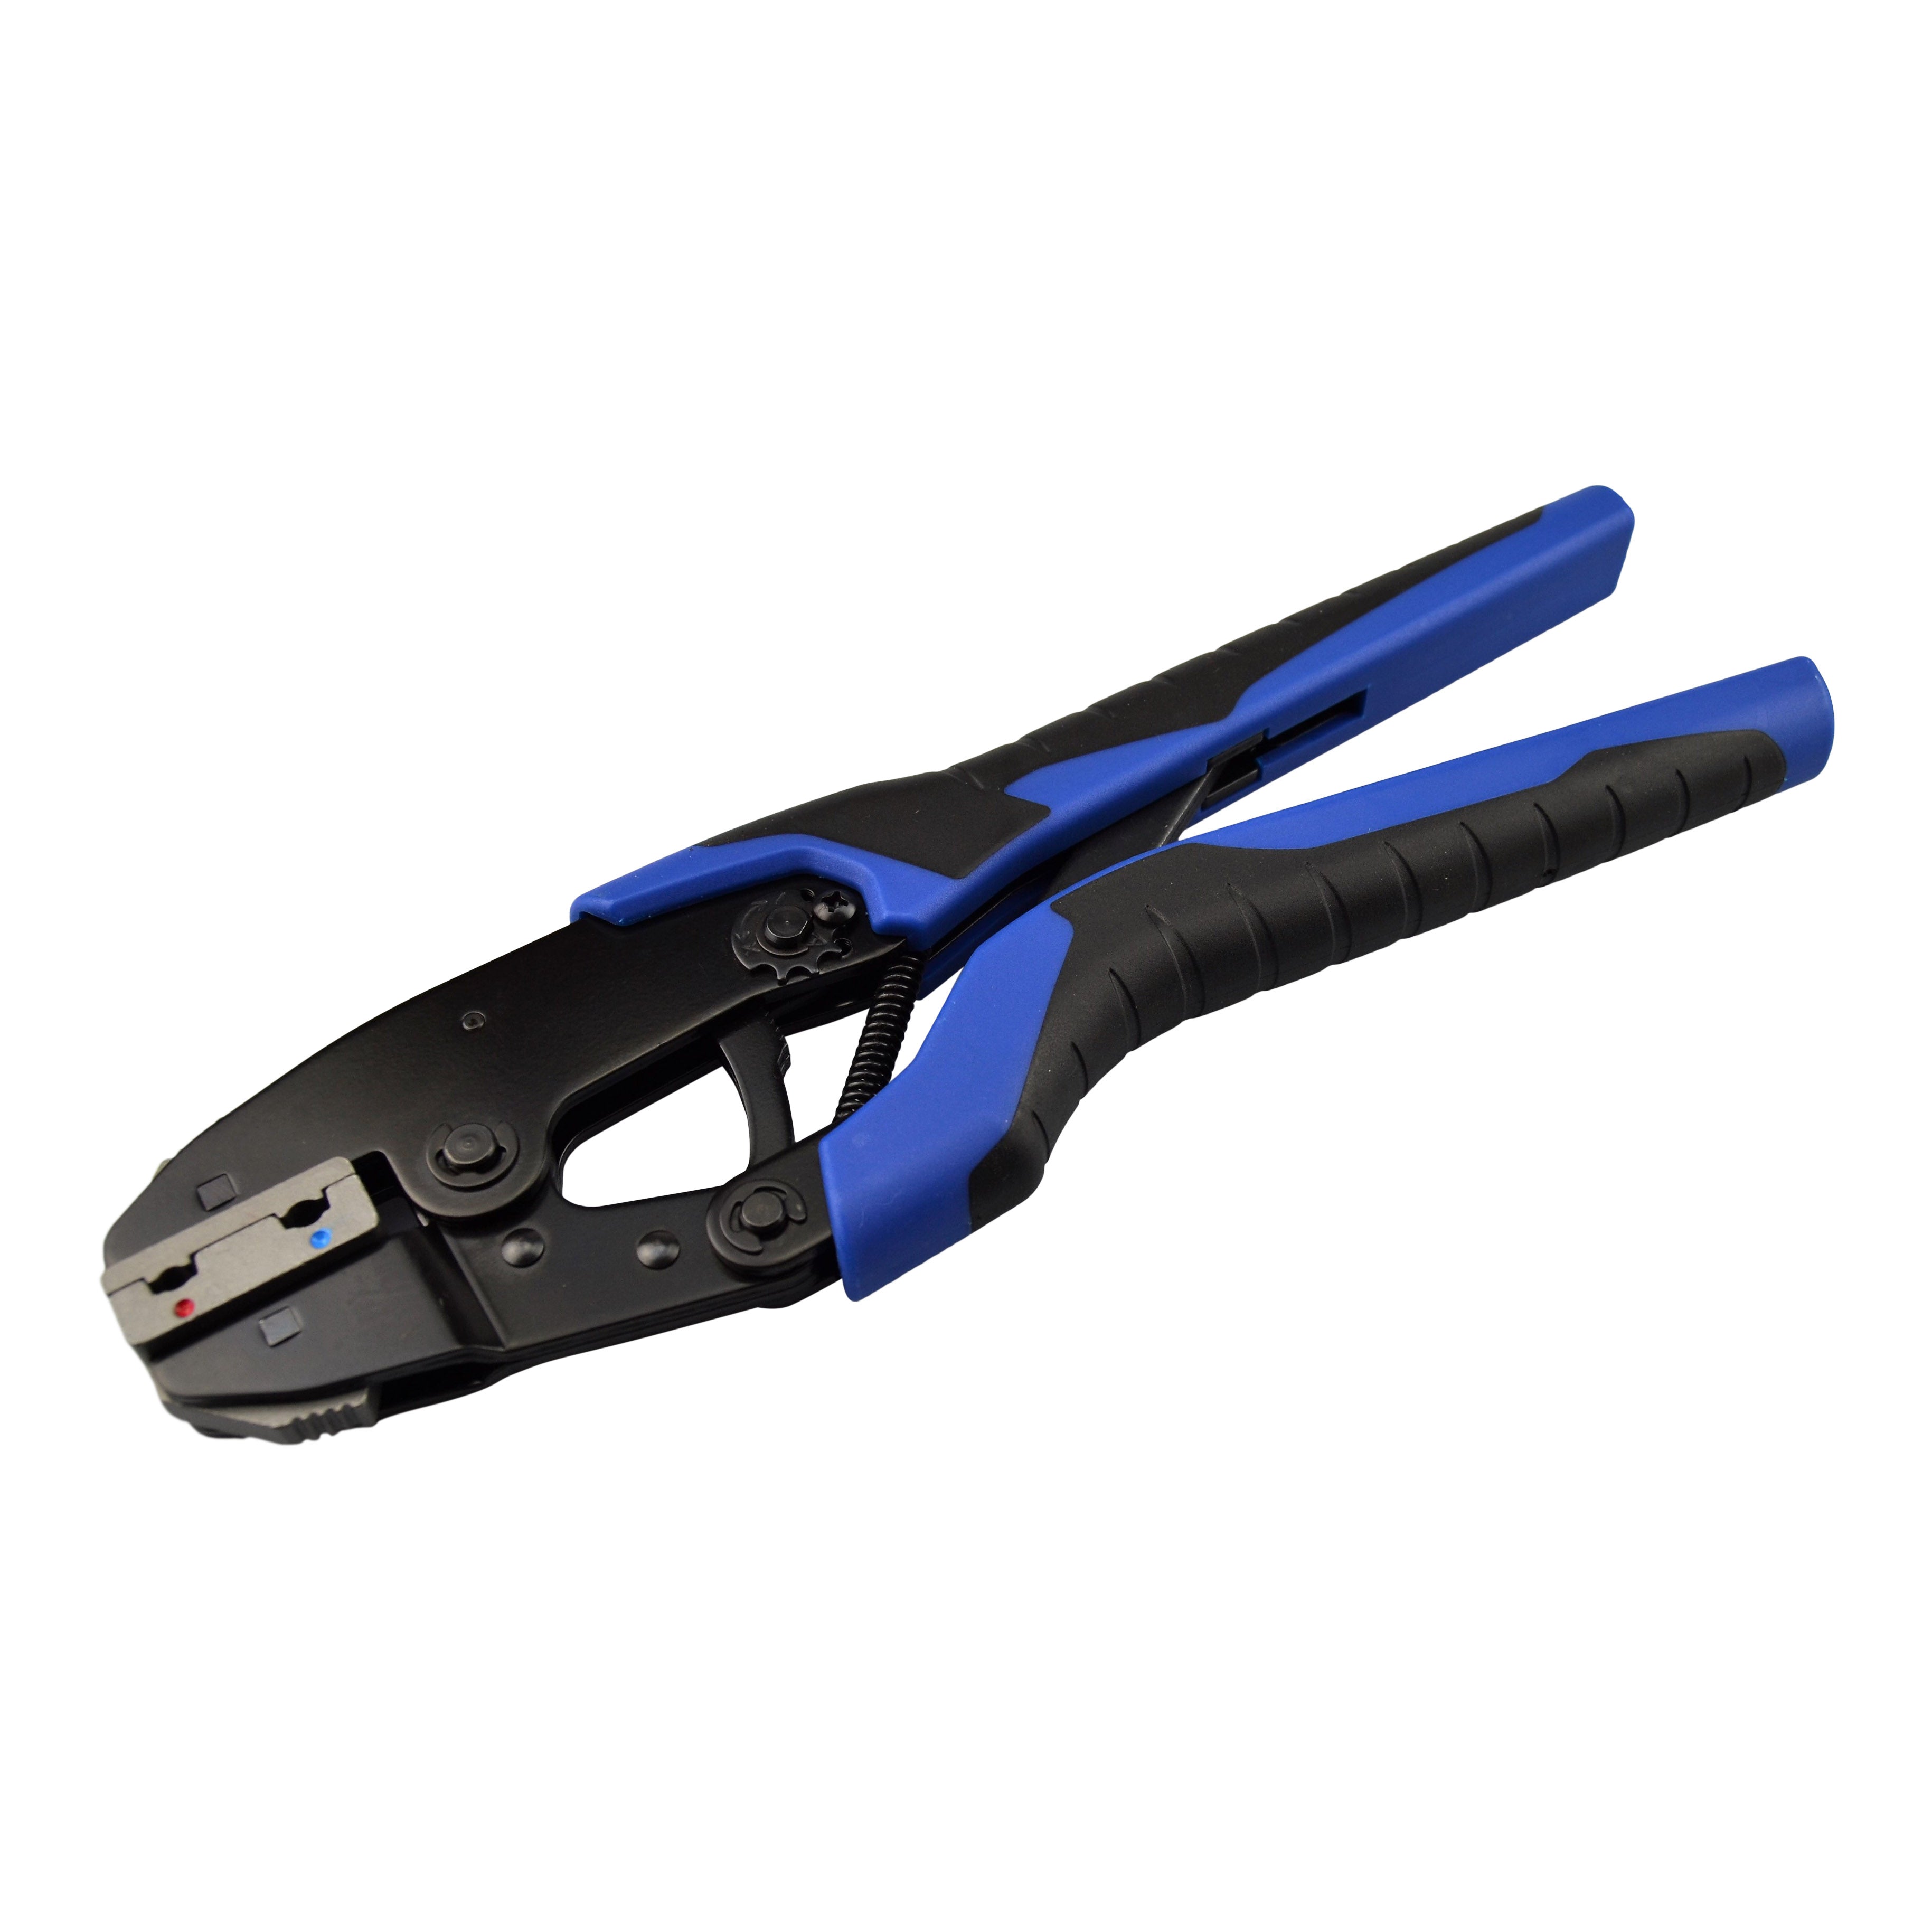 Ratchet Crimping Tool For Red & Blue Flag Terminals